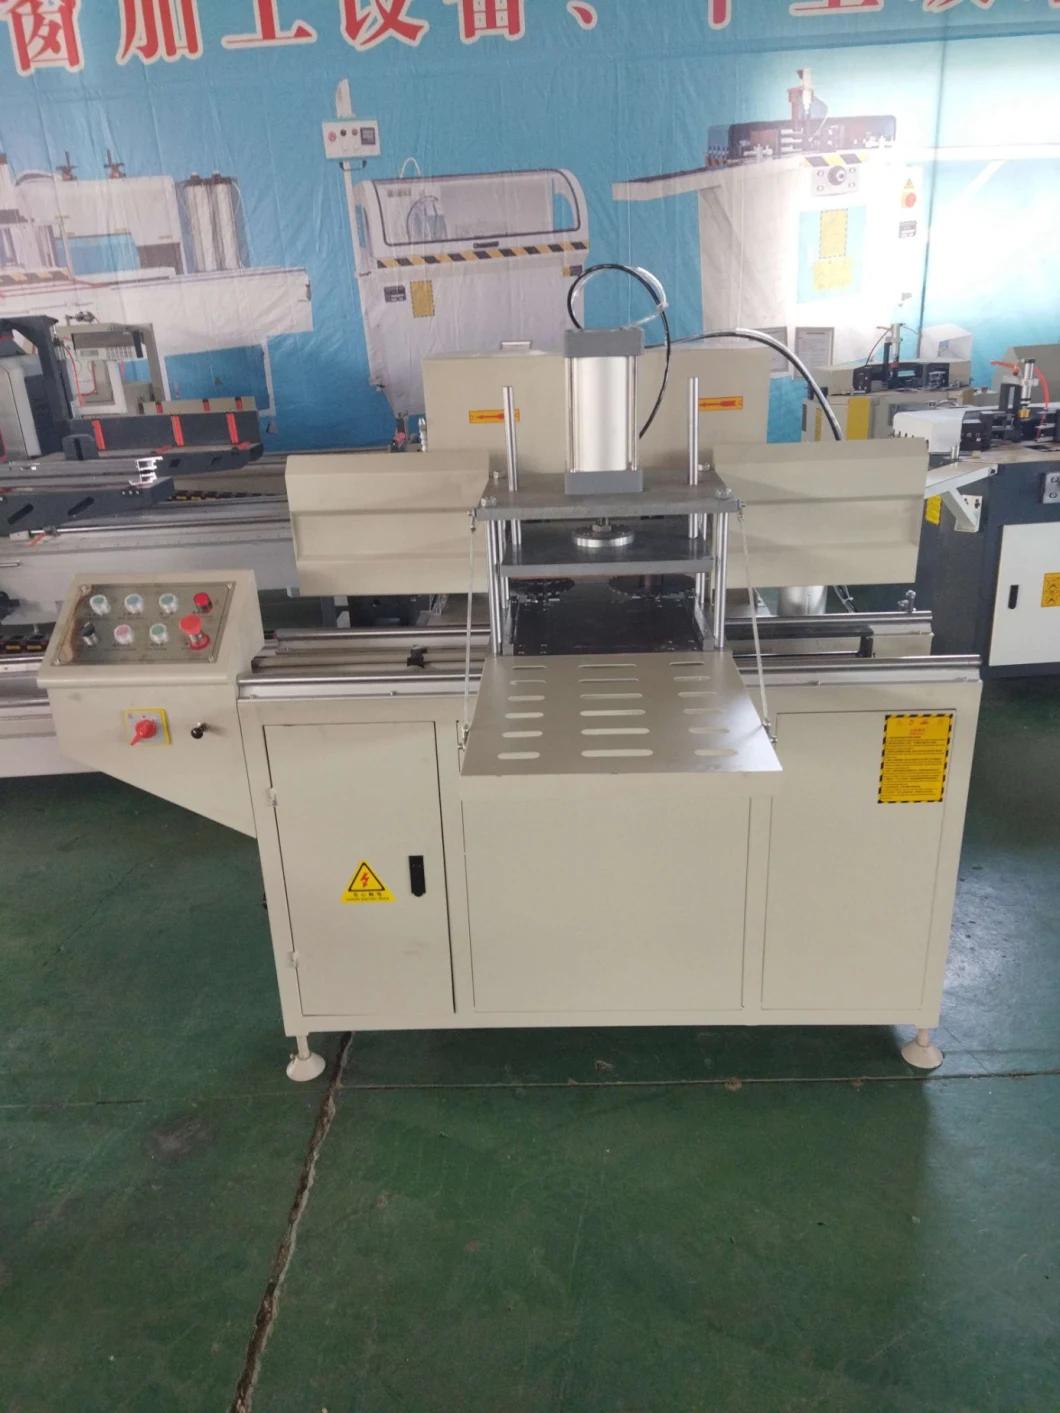 Lxd-200X4 Aluminum Profile Milling Machine for Endface and Tenons CNC Machine for Aluminum Doors and Windows Making CNC Cutter